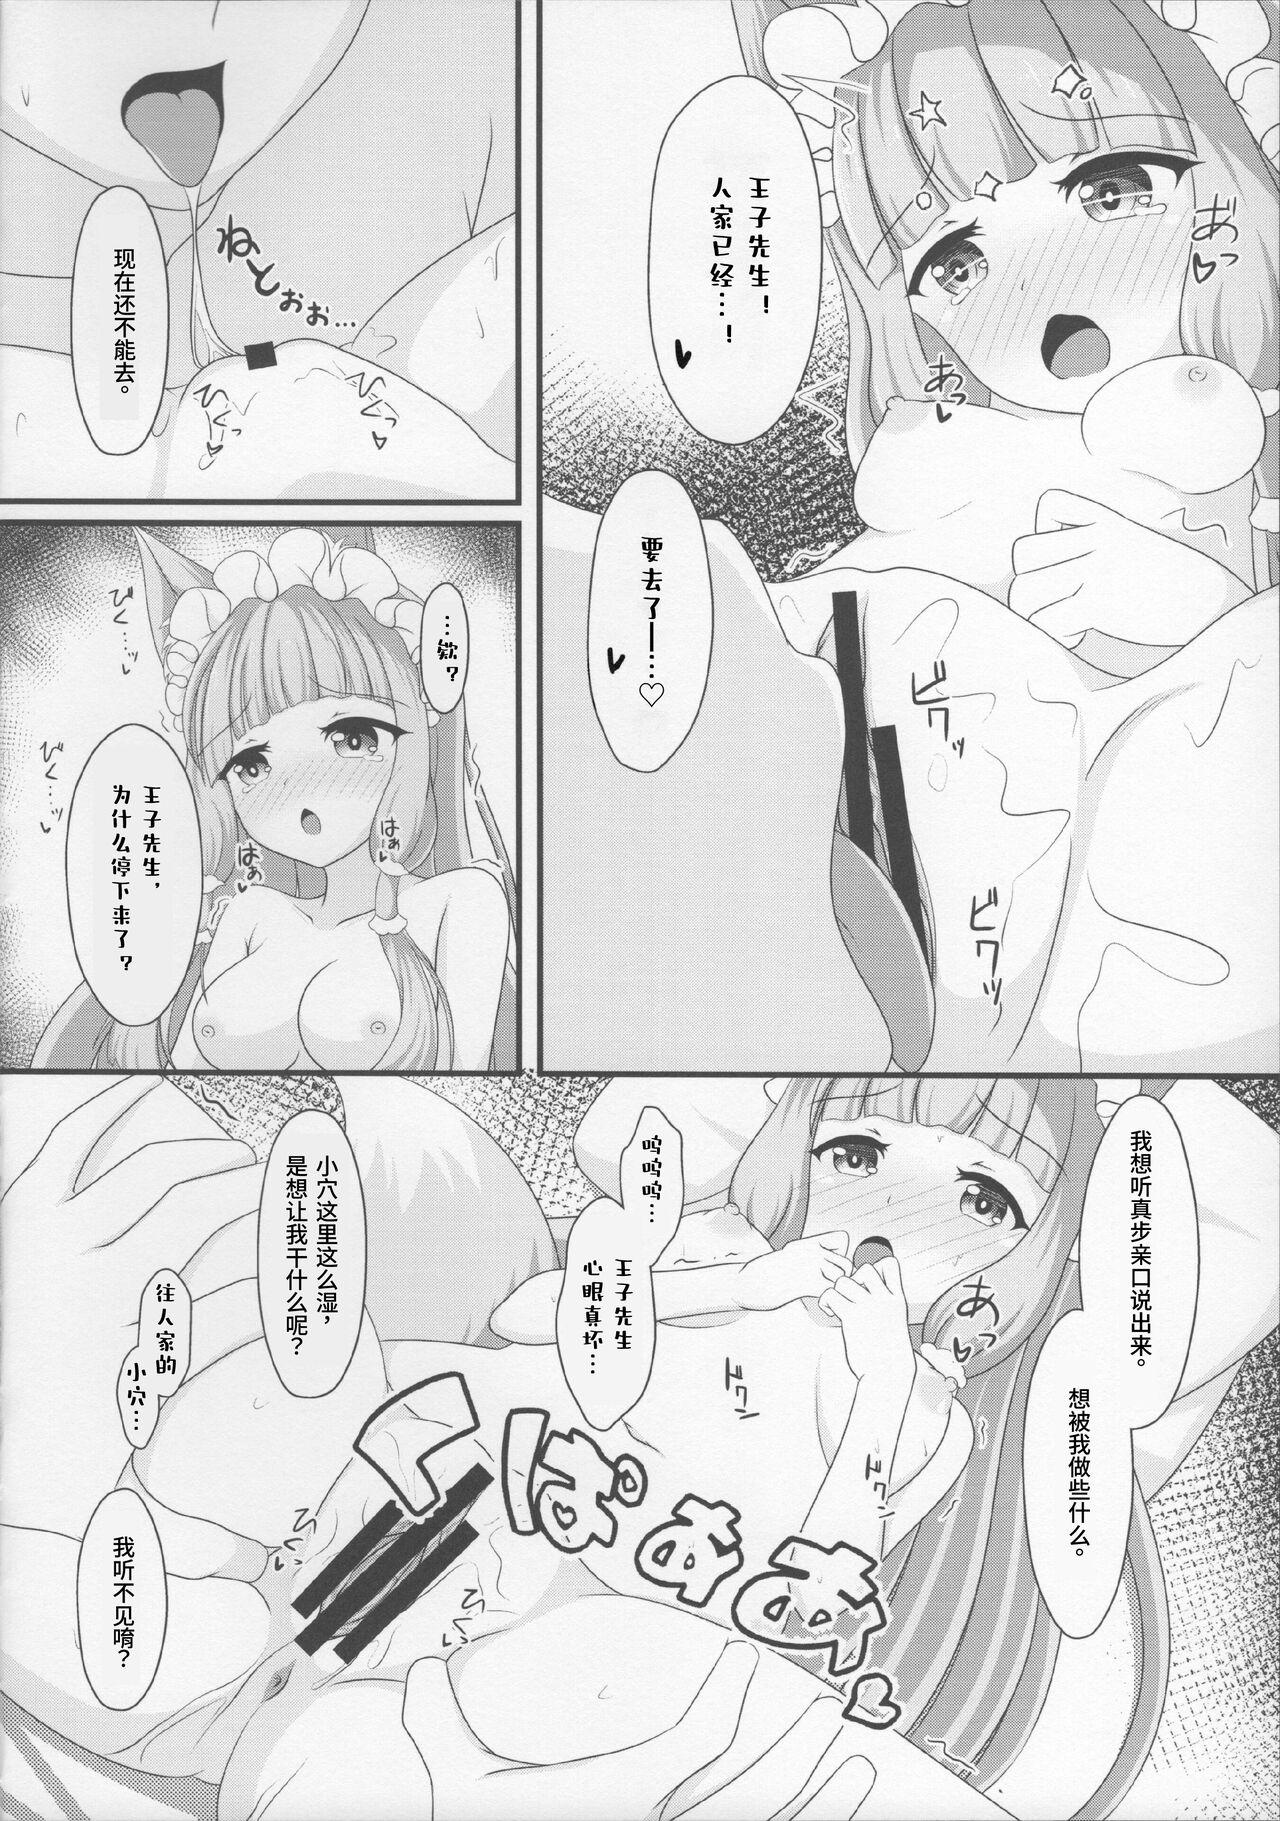 Cei Maho Hime Connect! 3 | 真步公主连结!3 - Princess connect Interacial - Page 12